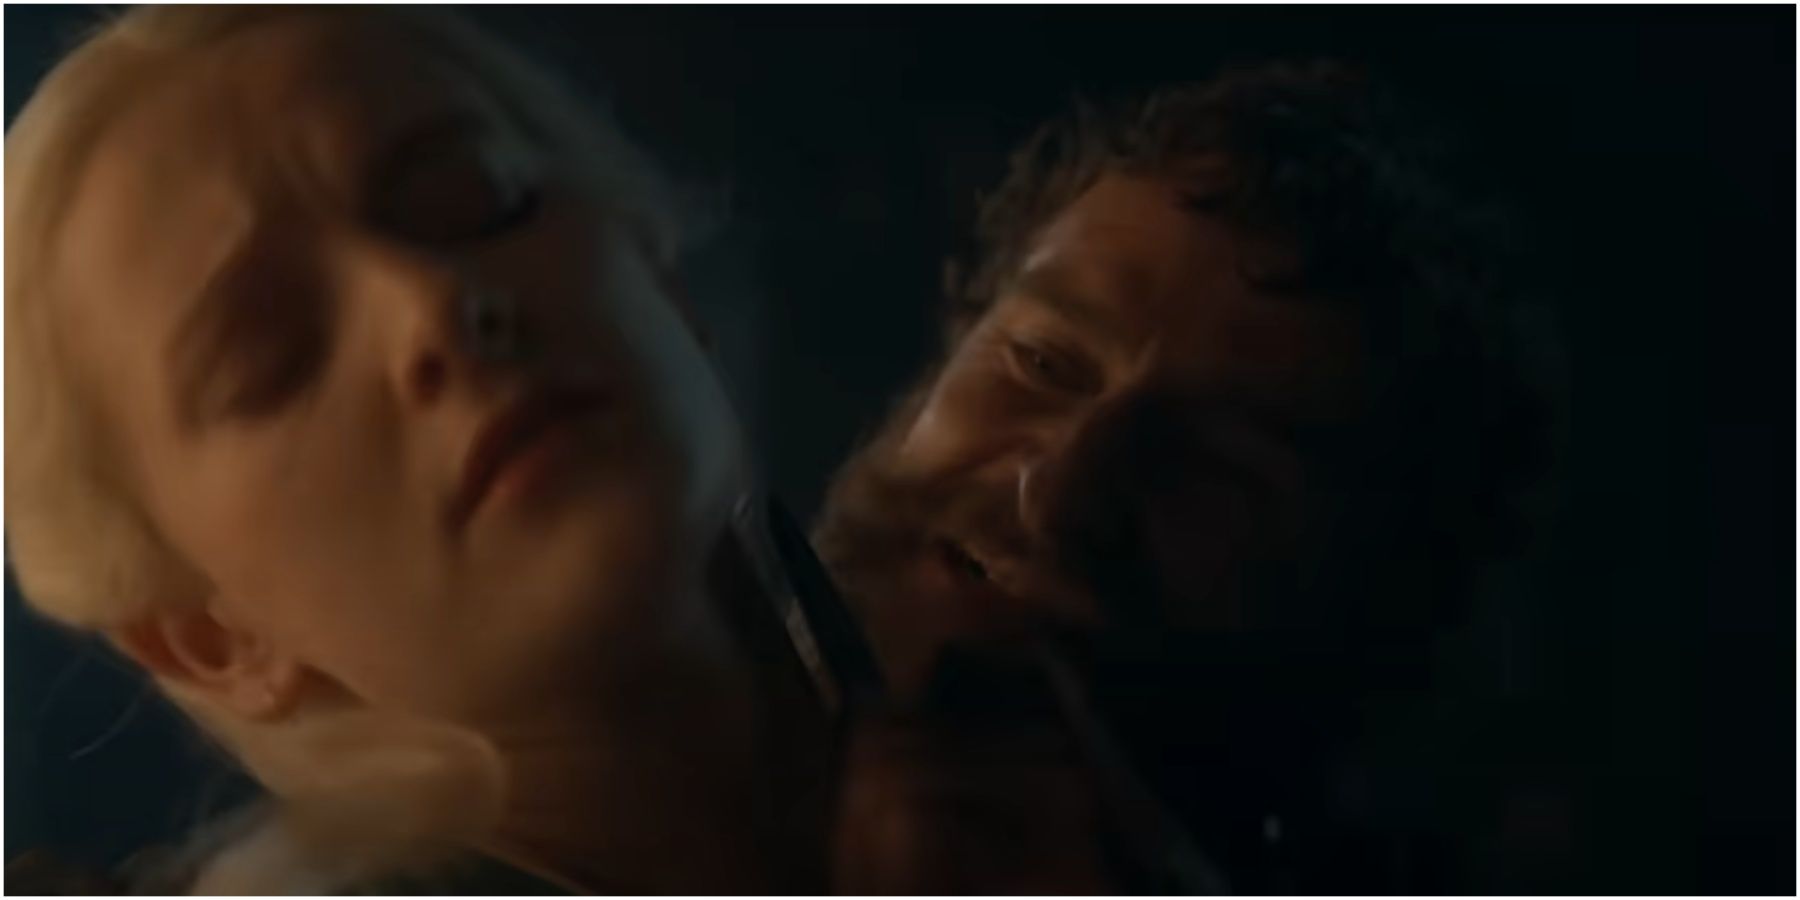 Helaena Targaryen and the Blood and Cheese Plot in House of the Dragon Season 2 teaser trailer.